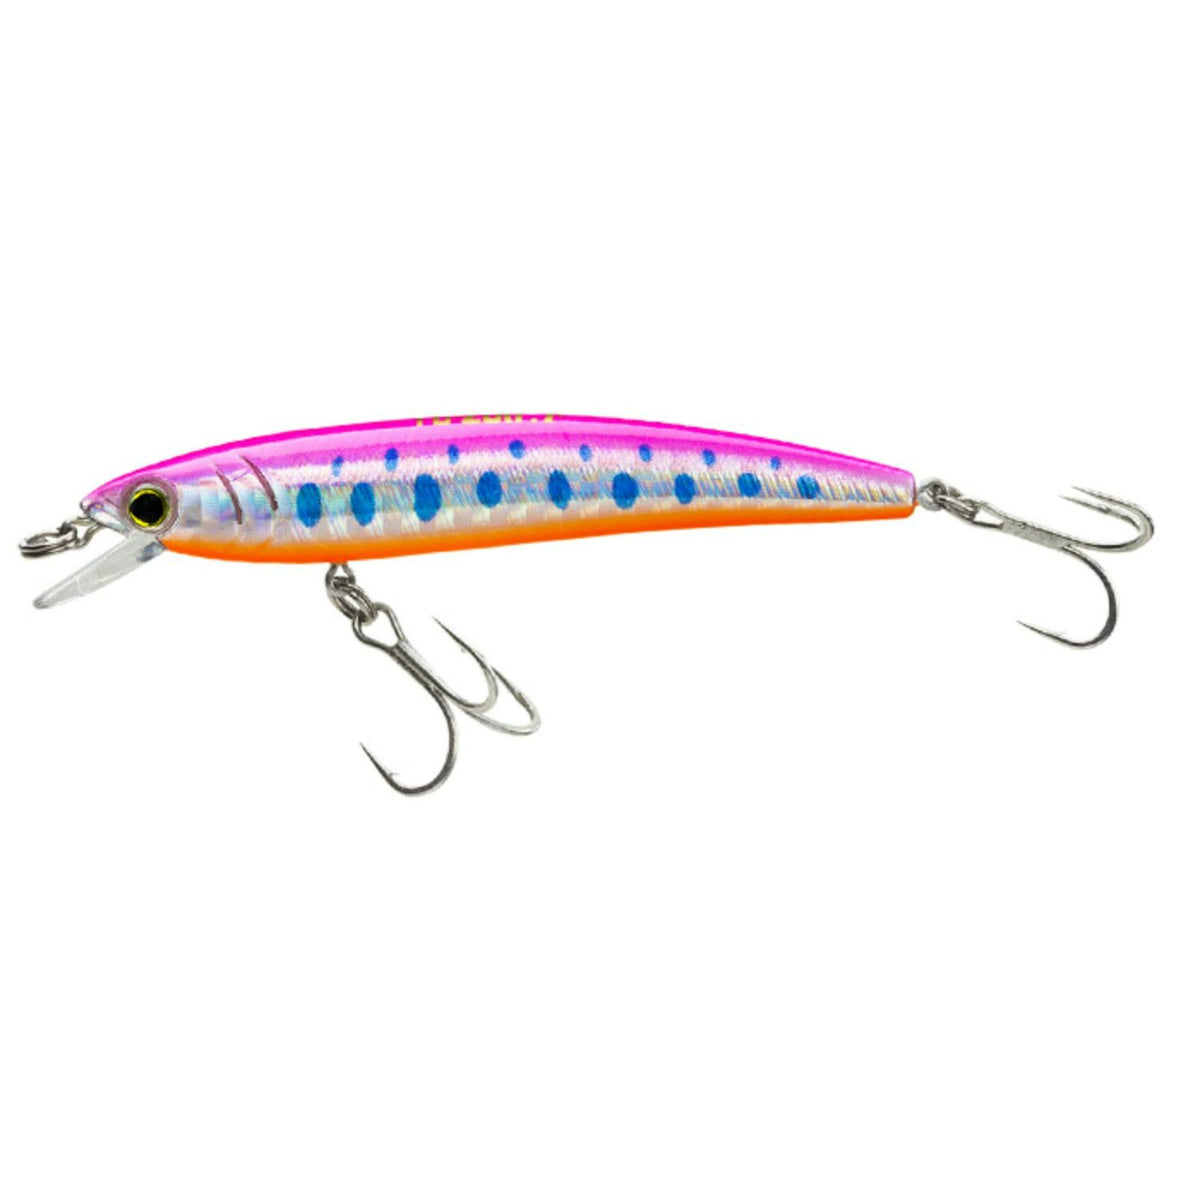 Hot Pink 70mm 2.75inch Yo-Zuri Pins Minnow Floating Trout Lures